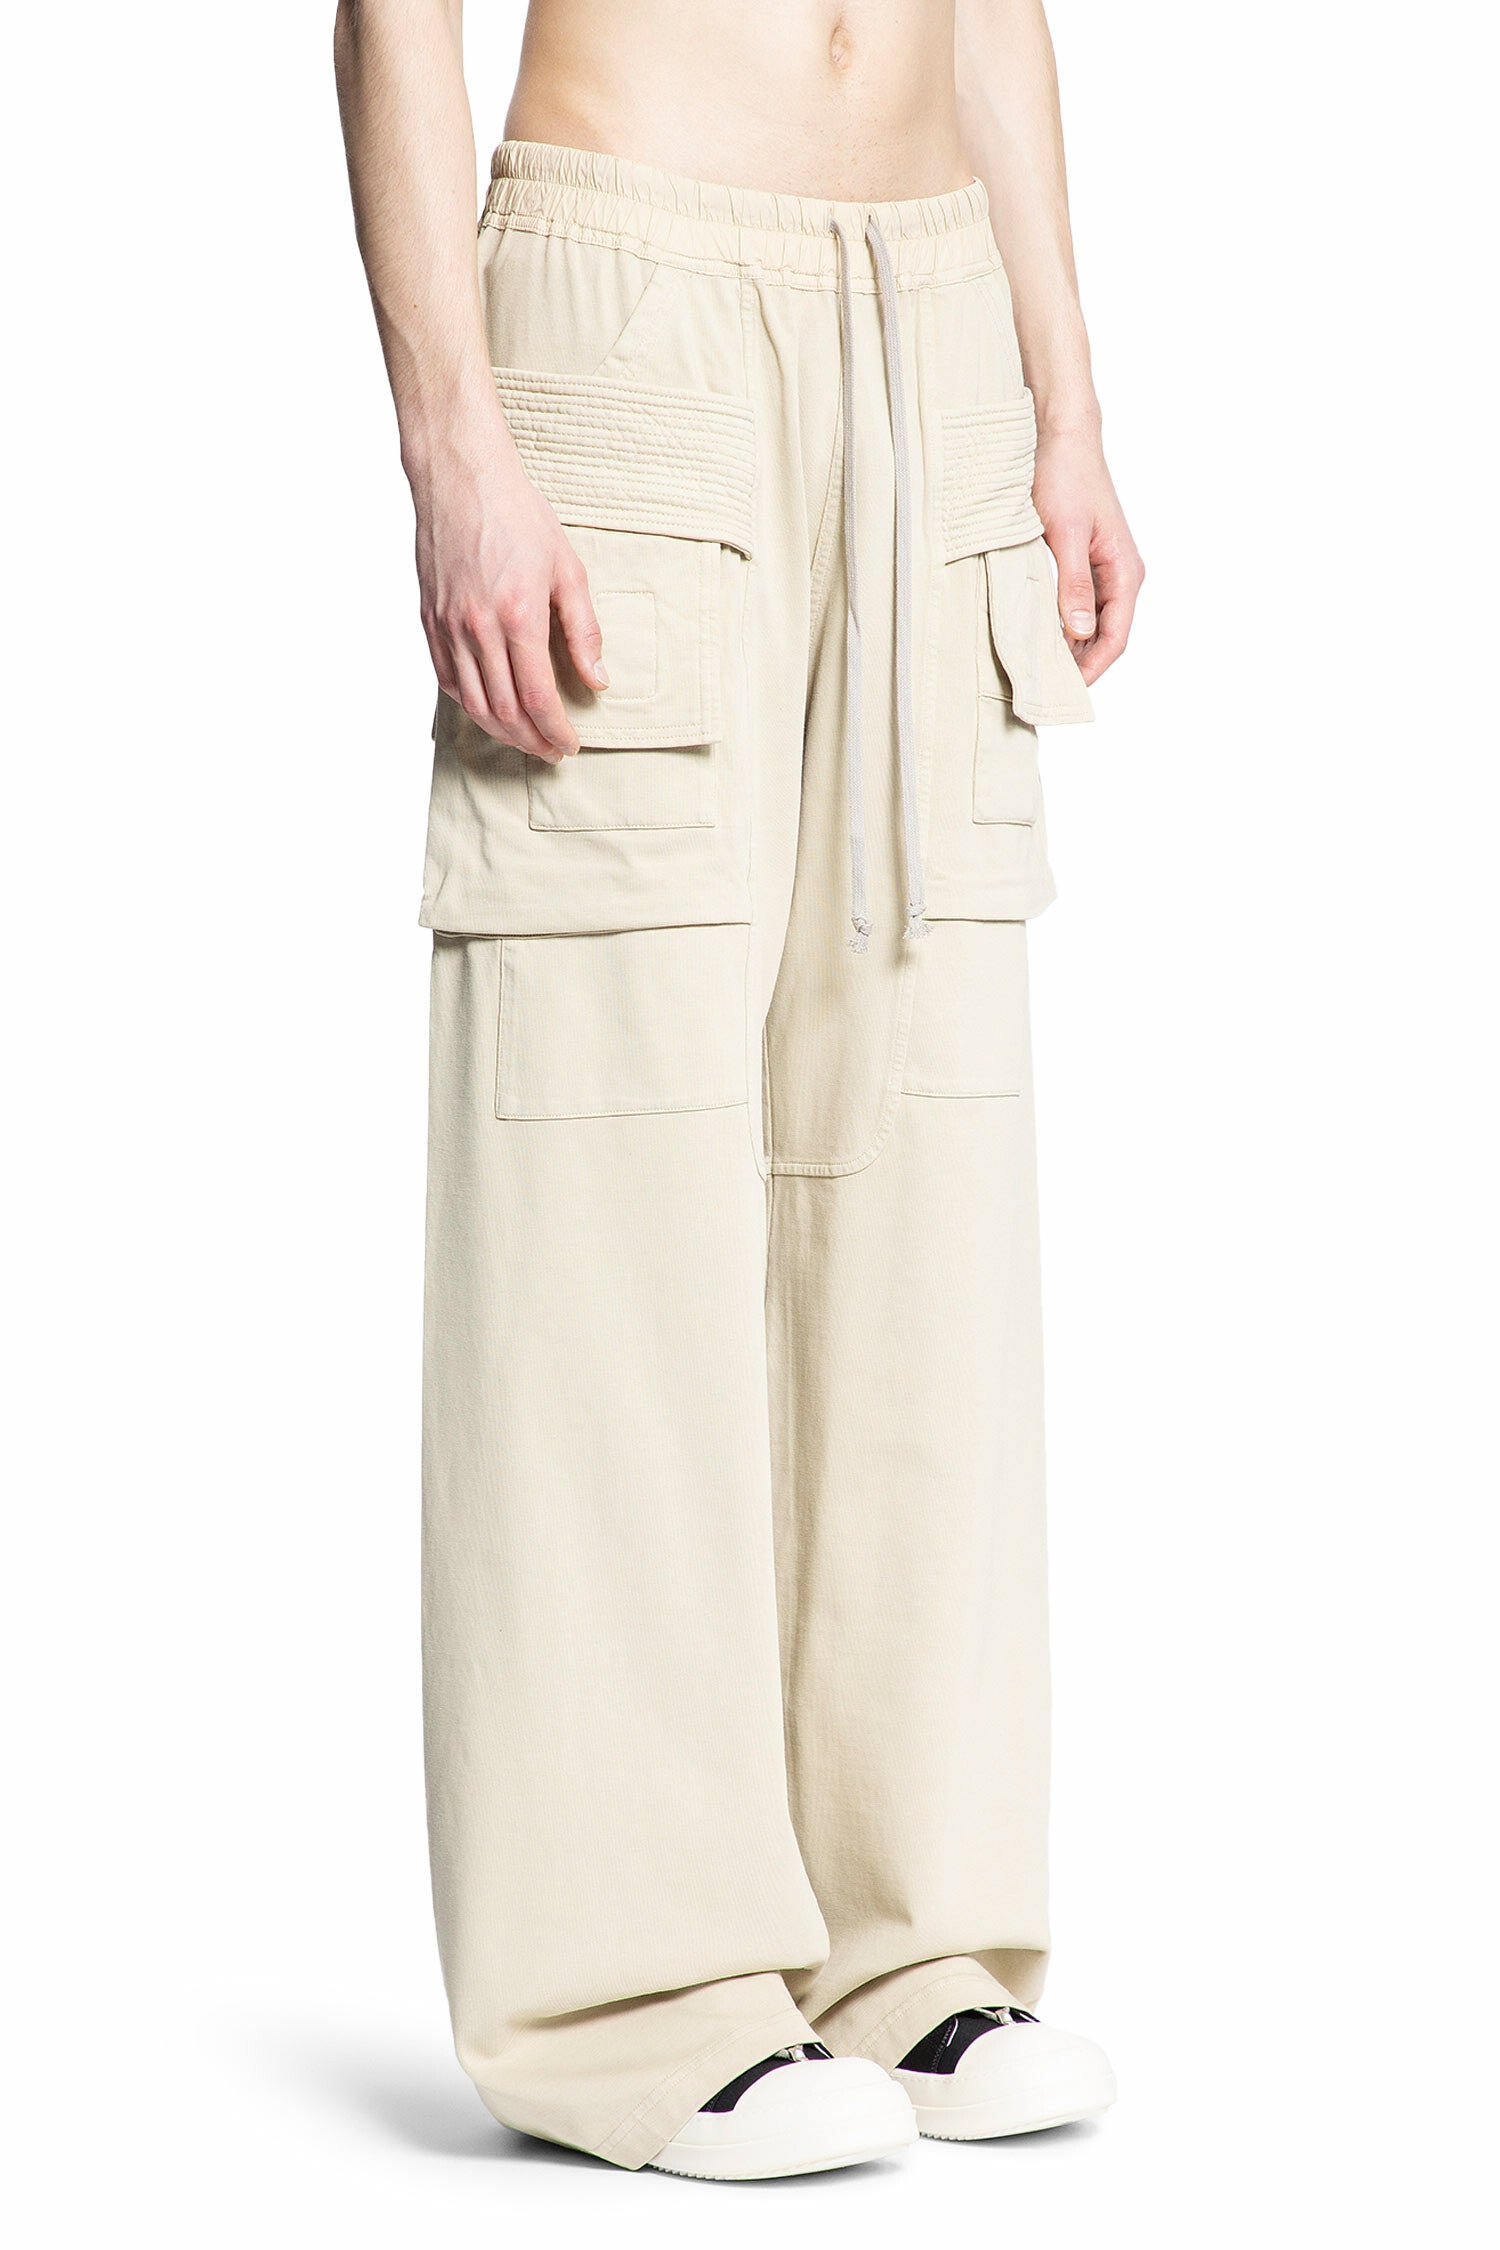 RICK OWENS MAN OFF-WHITE TROUSERS